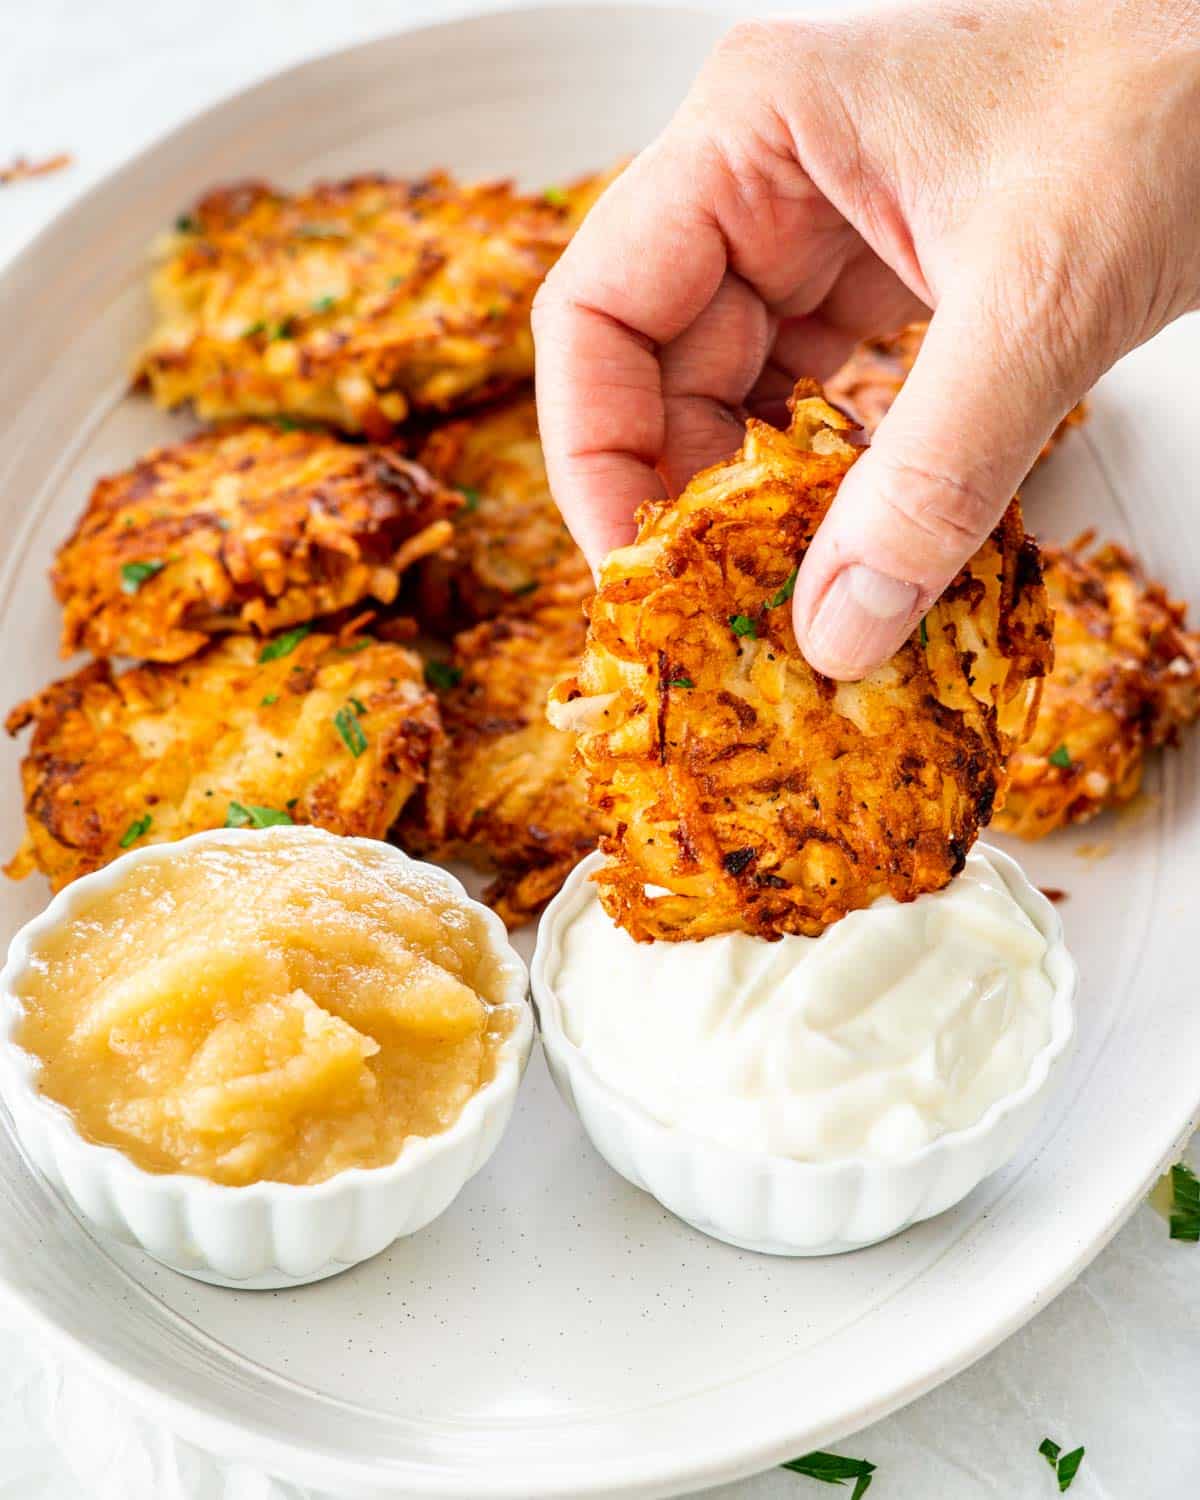 a hand dipping a latke in sour cream on a platter full of latkes